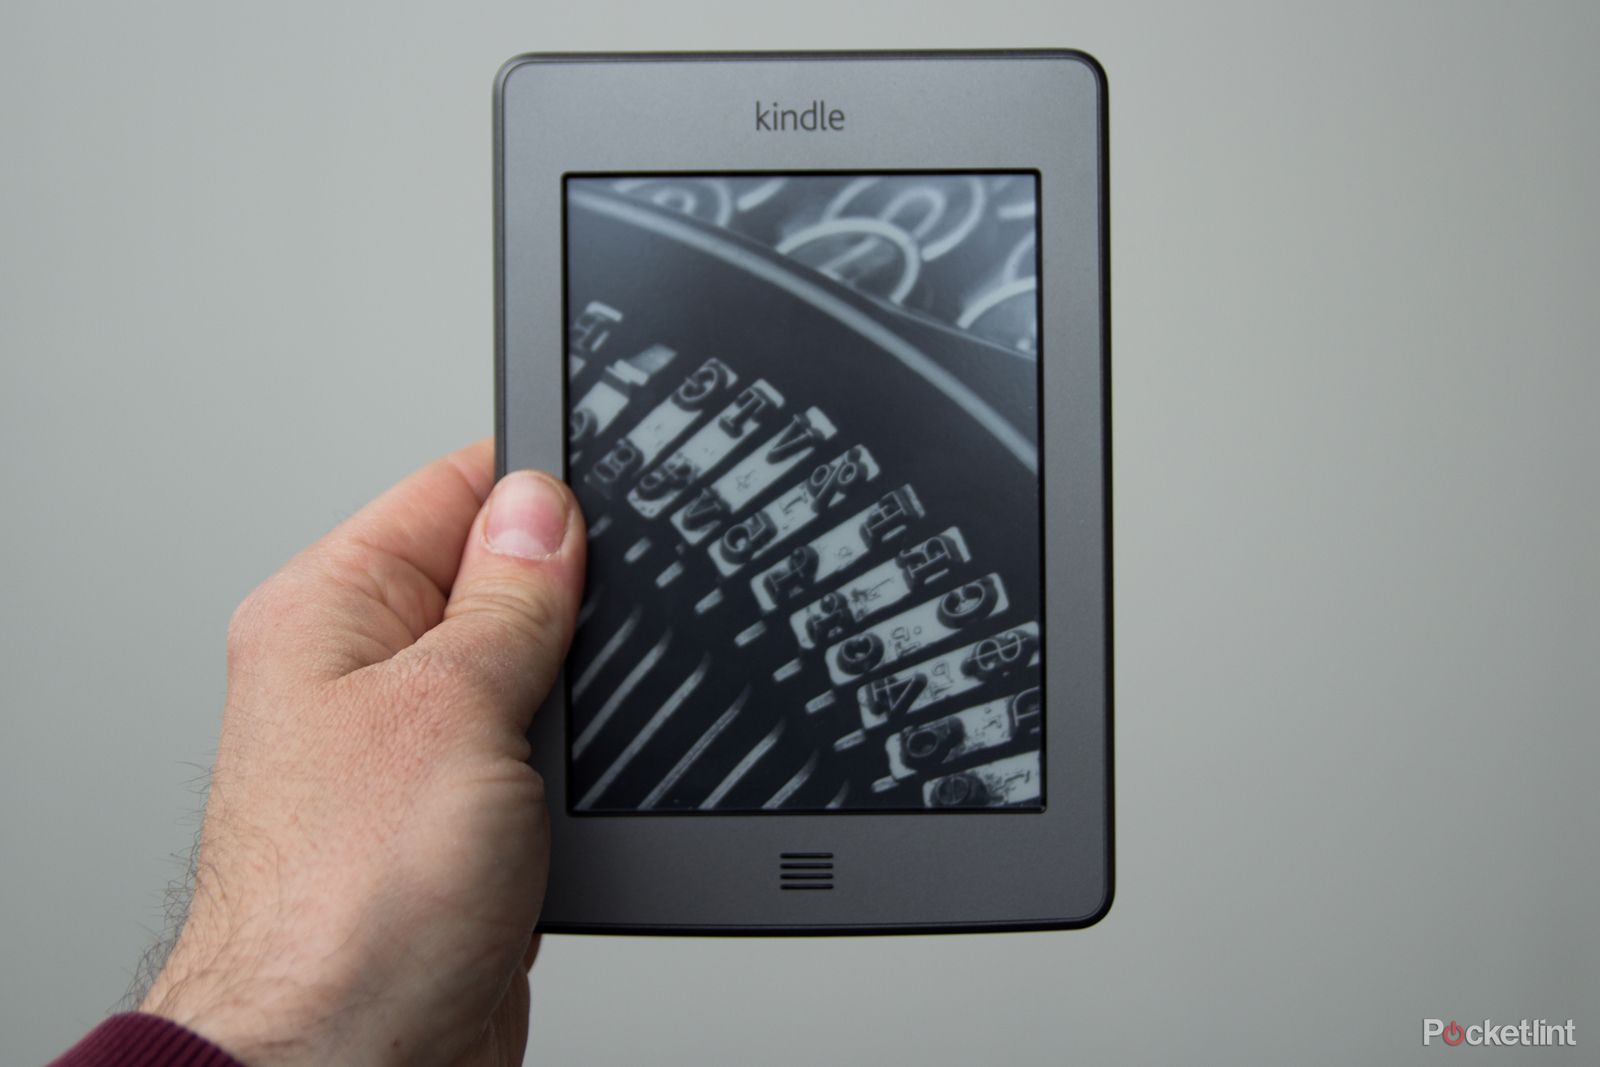 amazon kindle a brief history from the original kindle onwards image 5